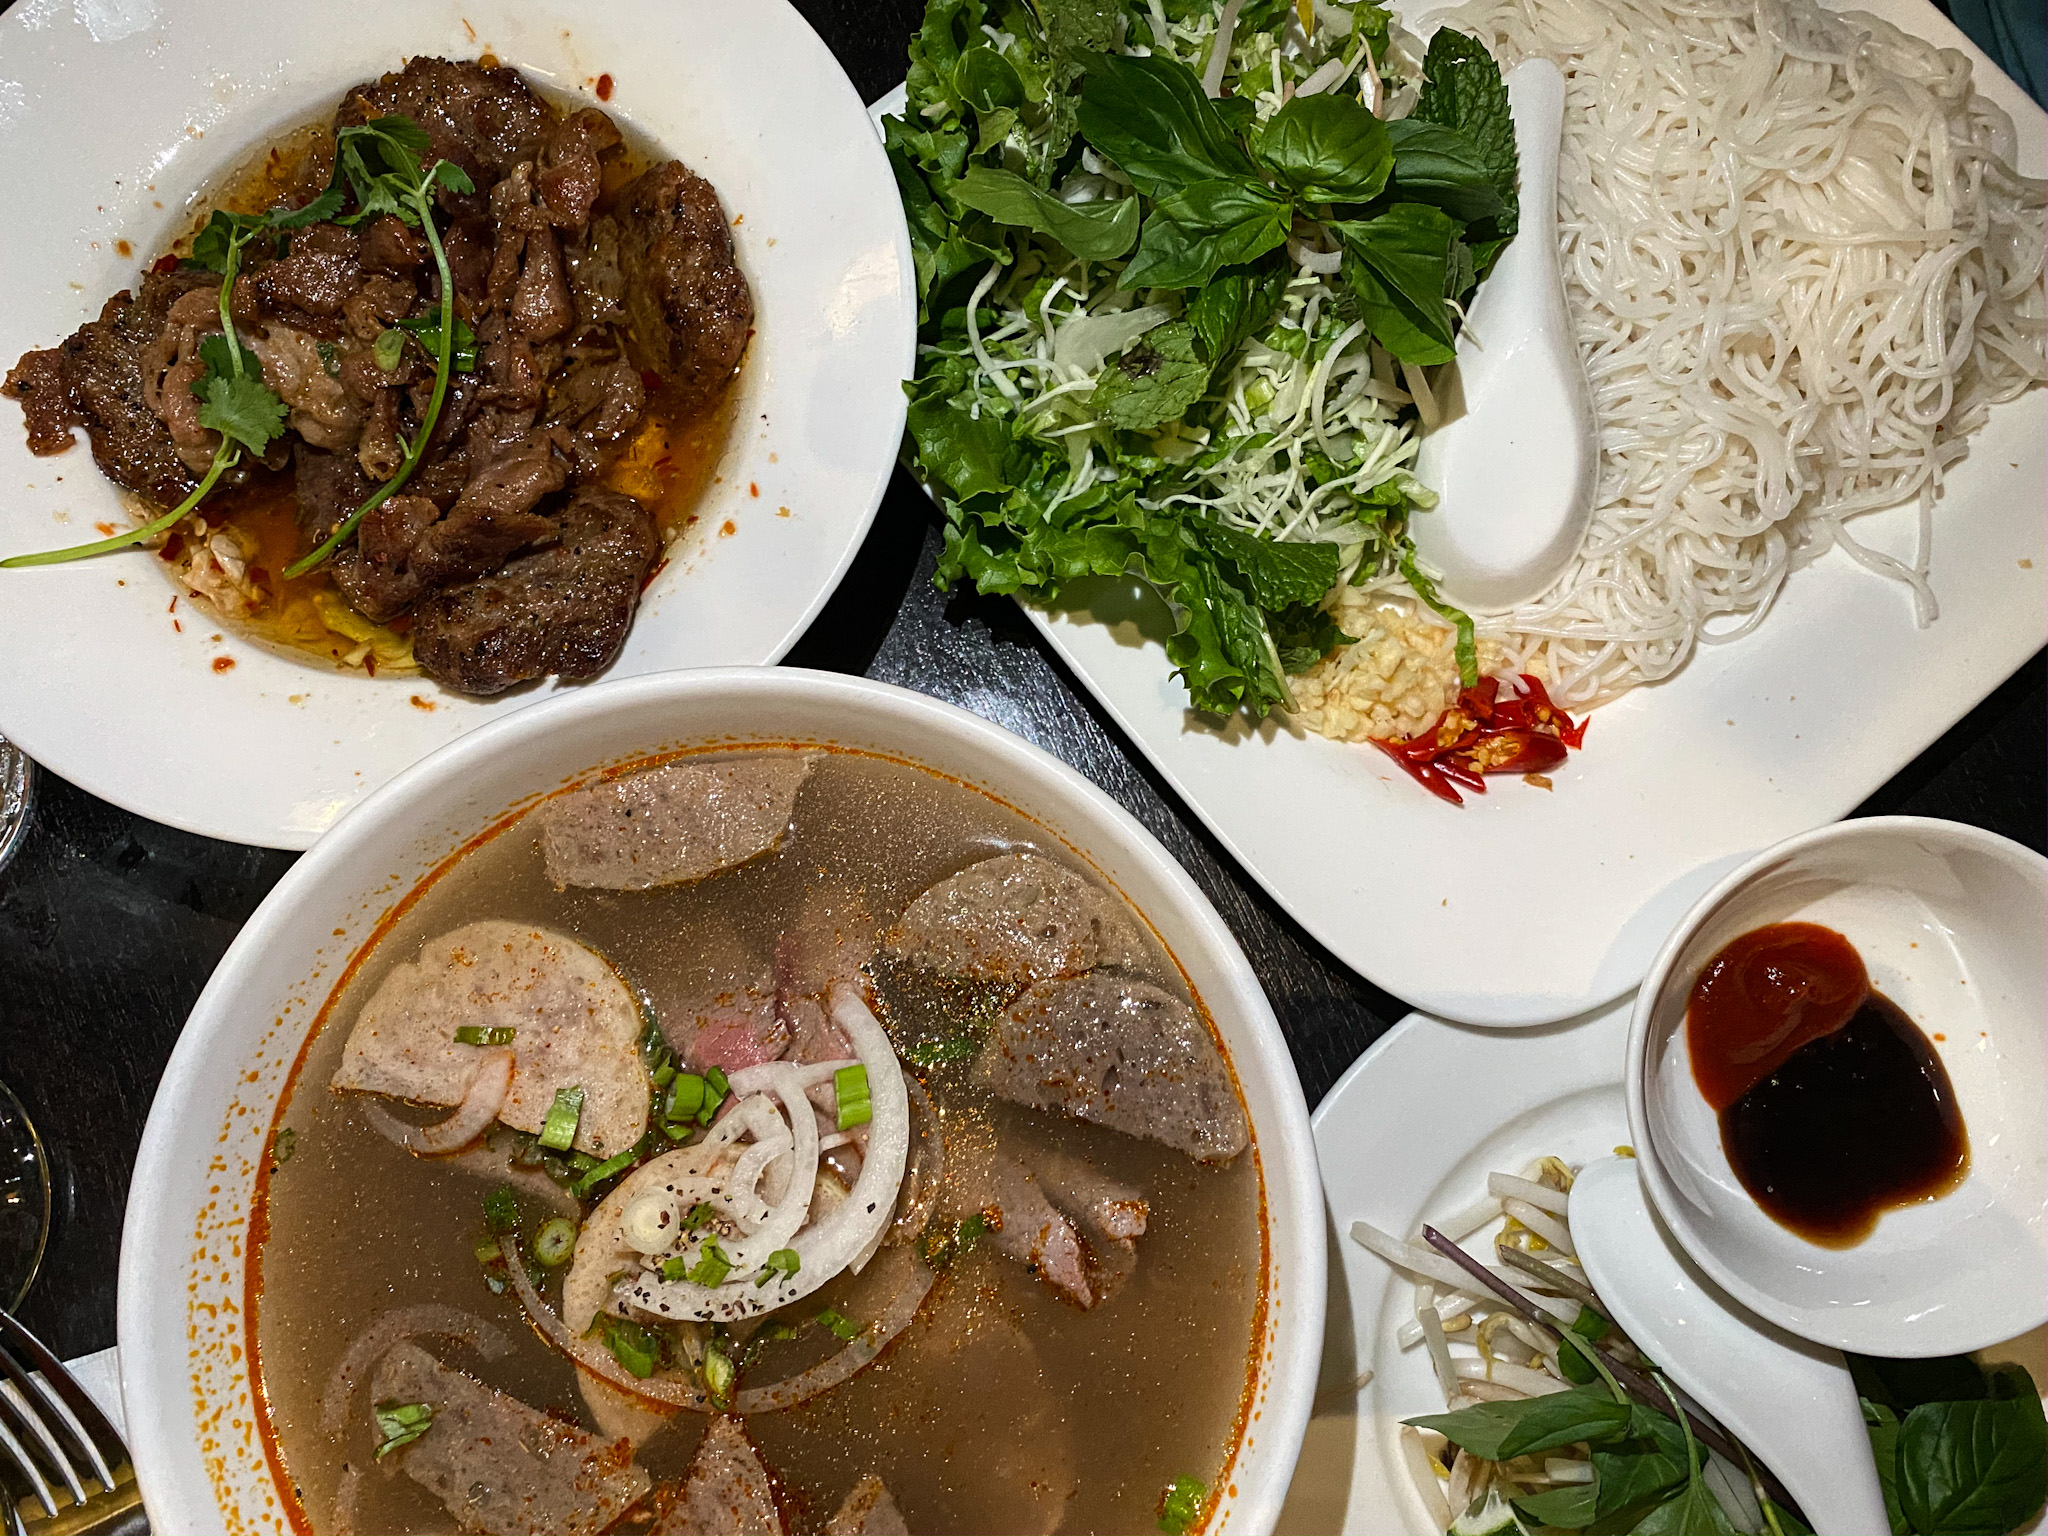 Hai Noi and Bun Cha - a small portion of the deliciousness on the menu